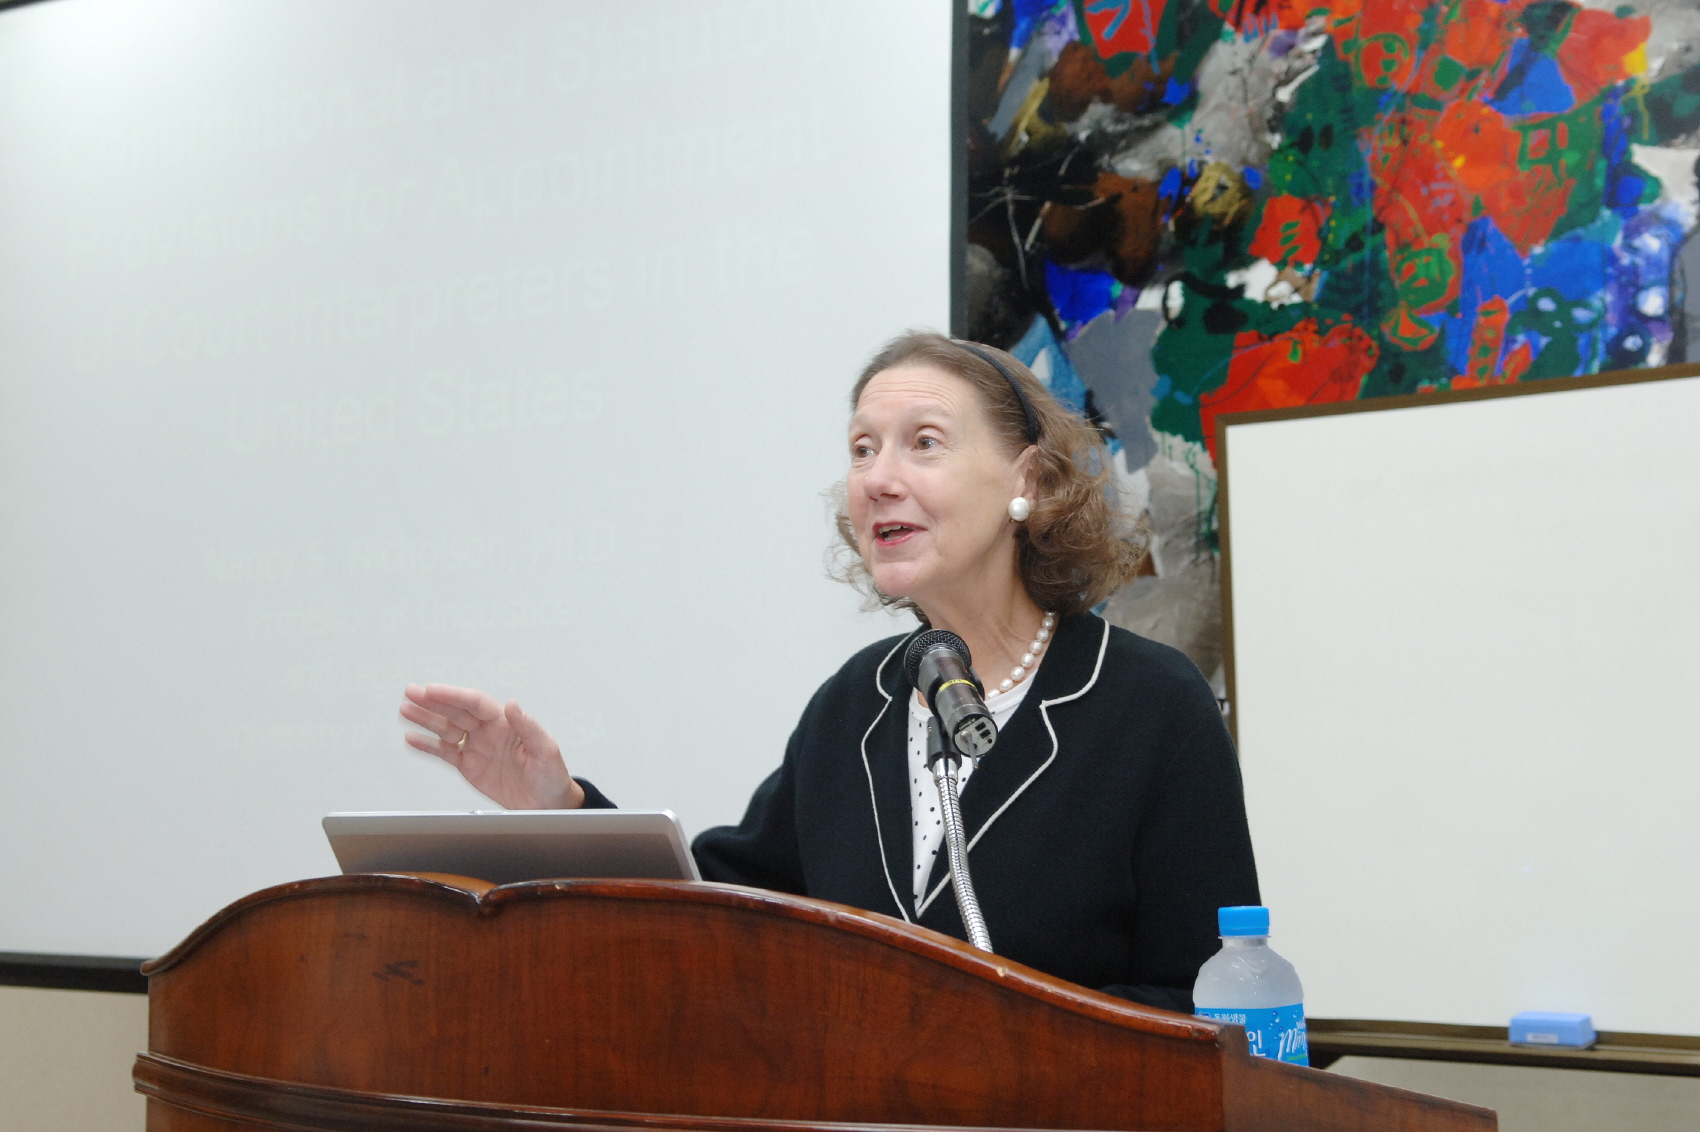 [09_24_08]Professor Nancy S. Nicholson of Delaware University invited as the guest speaker for the Third Policy Forum hosted by the NCA